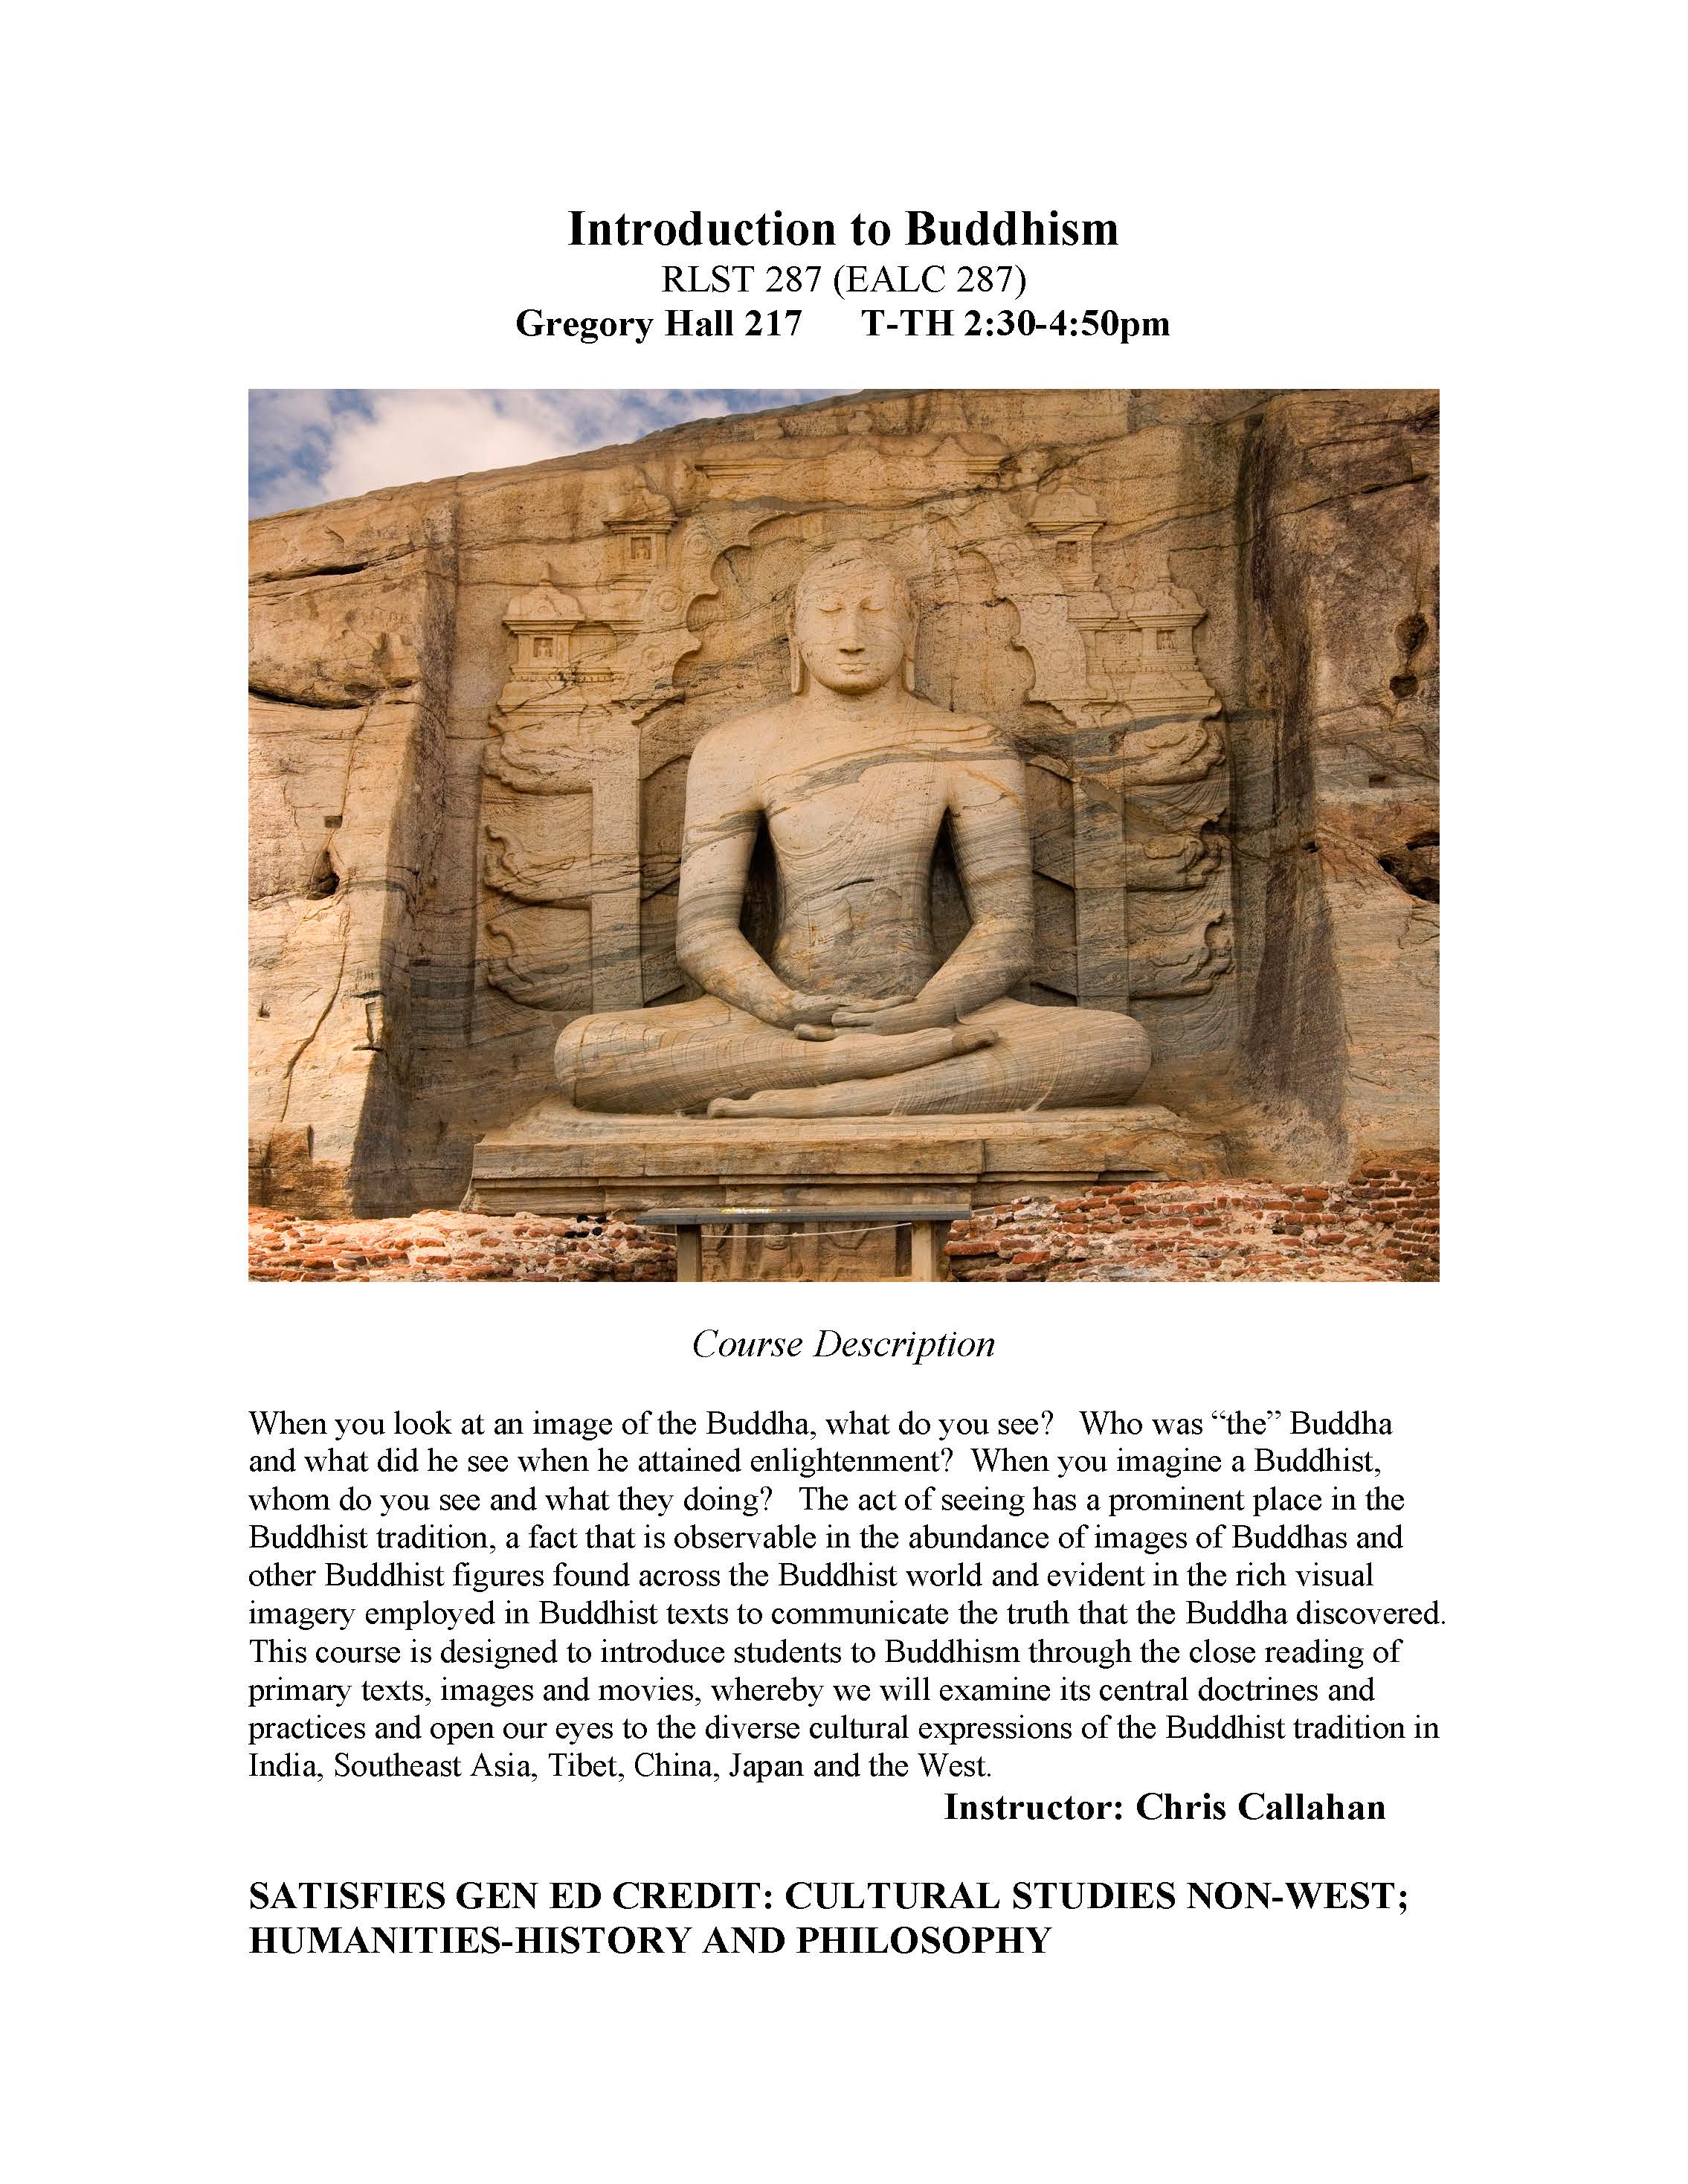 INTRO TO BUDDHISM FLYER